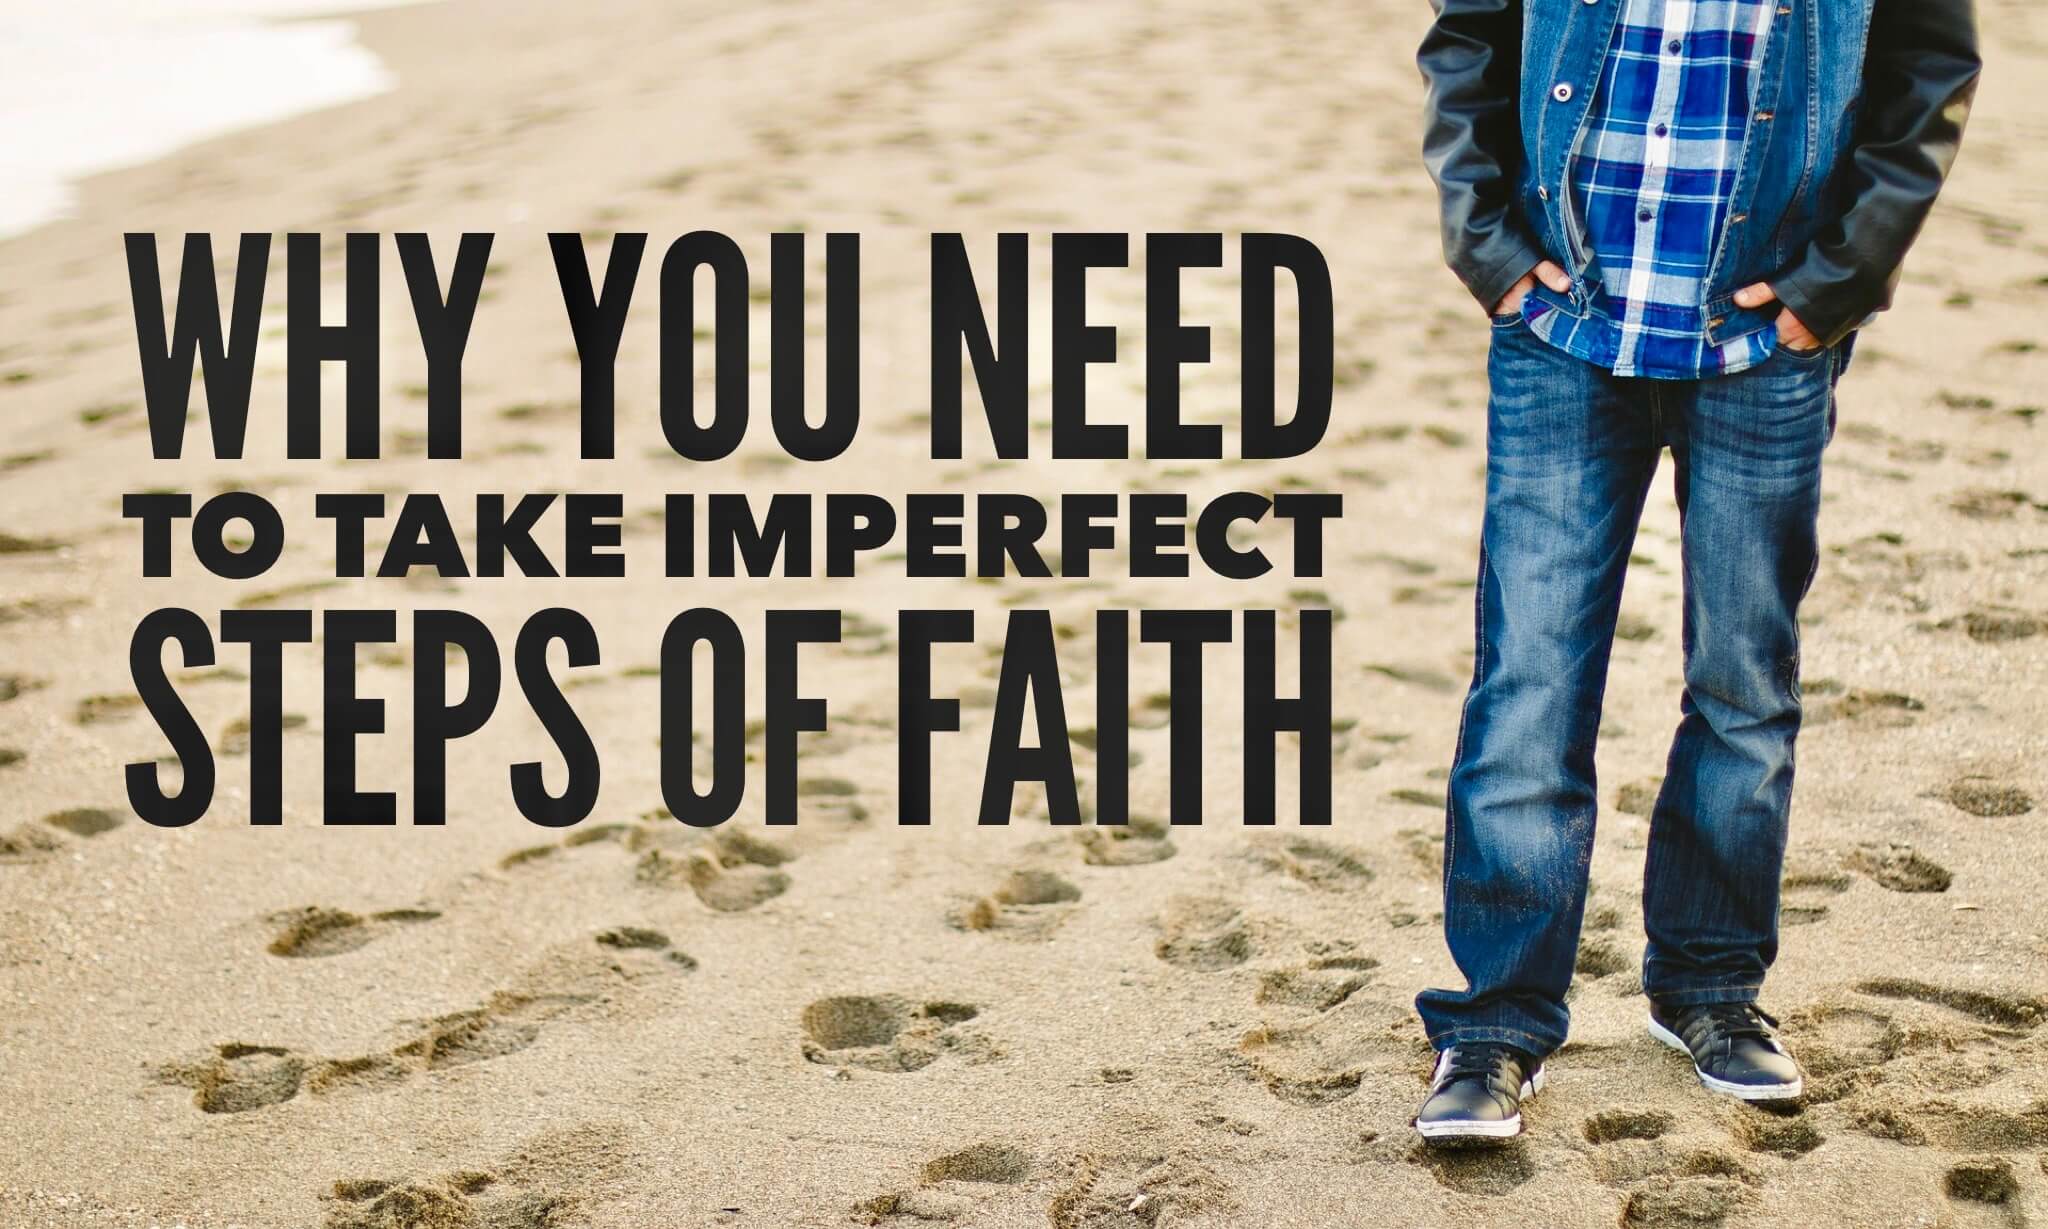 take imperfect steps of faith